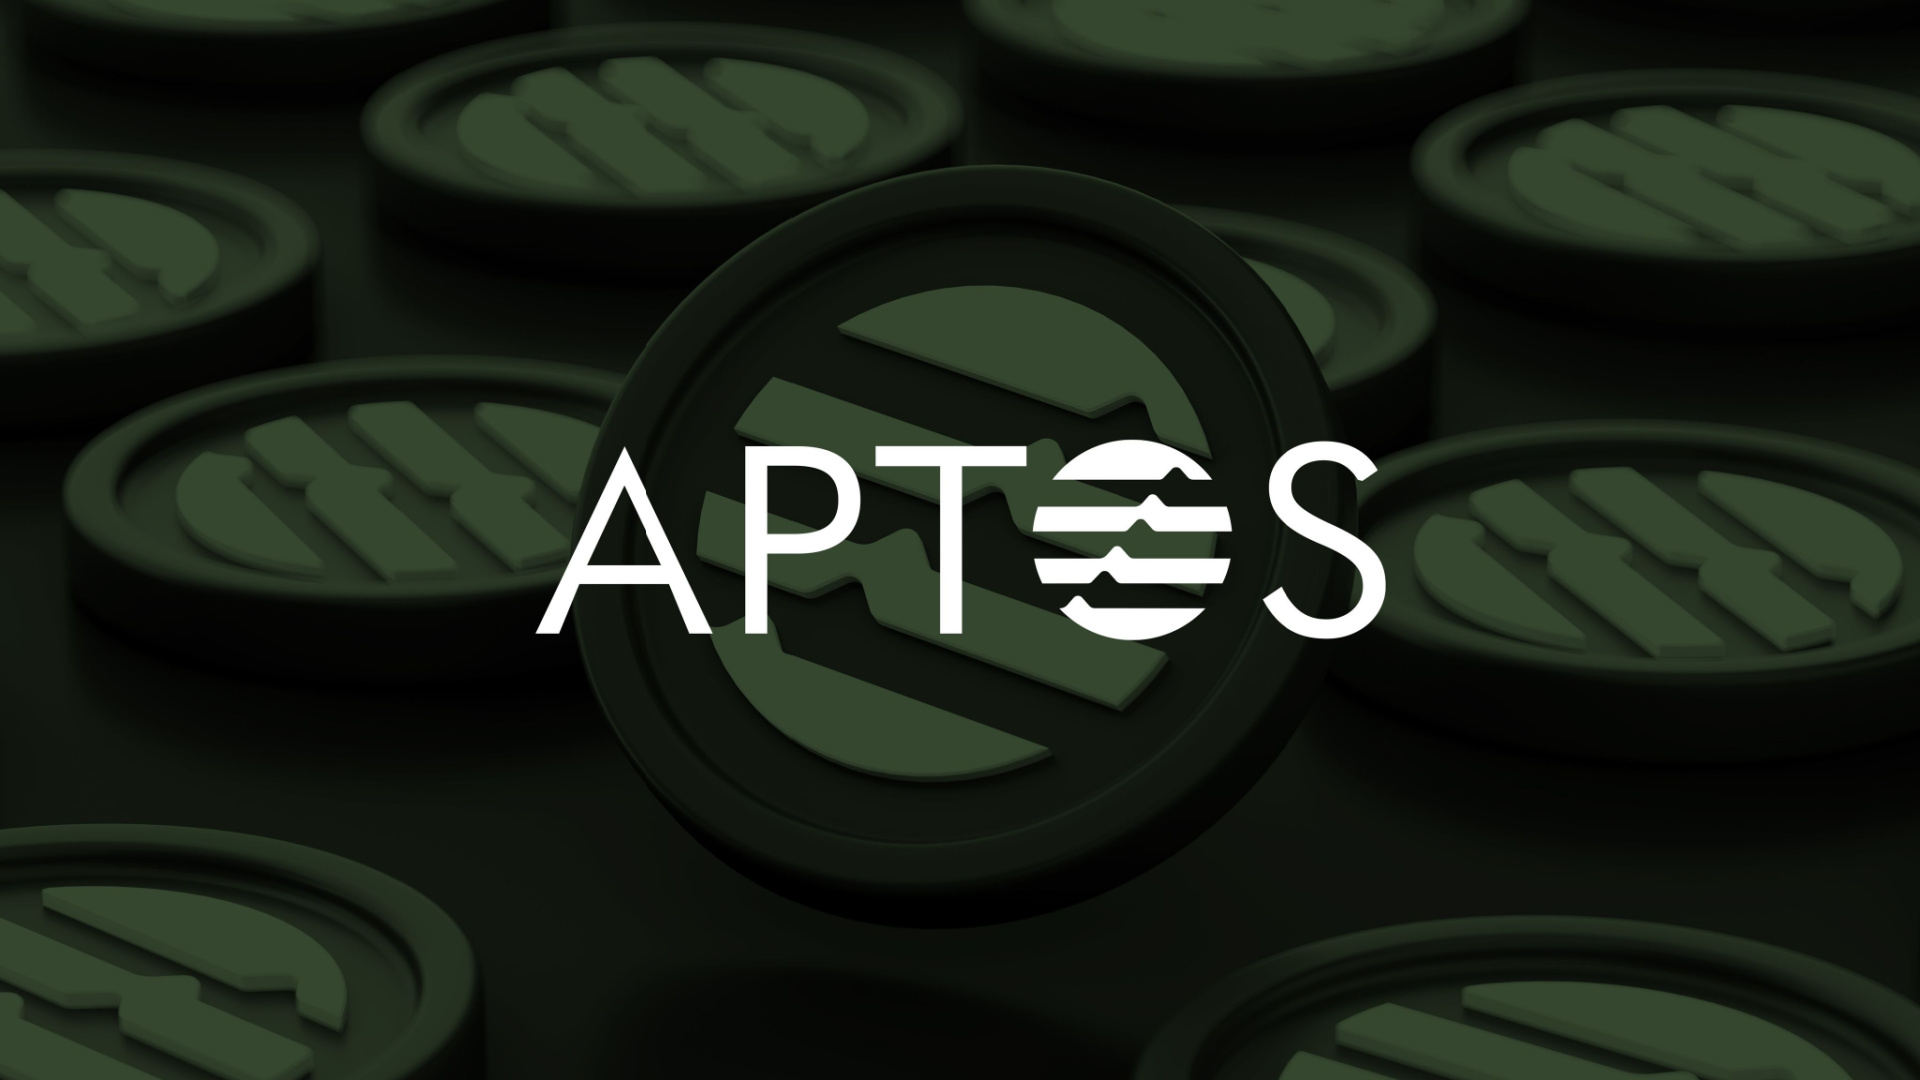 Aptos – Launch of its mainnet between success and questions